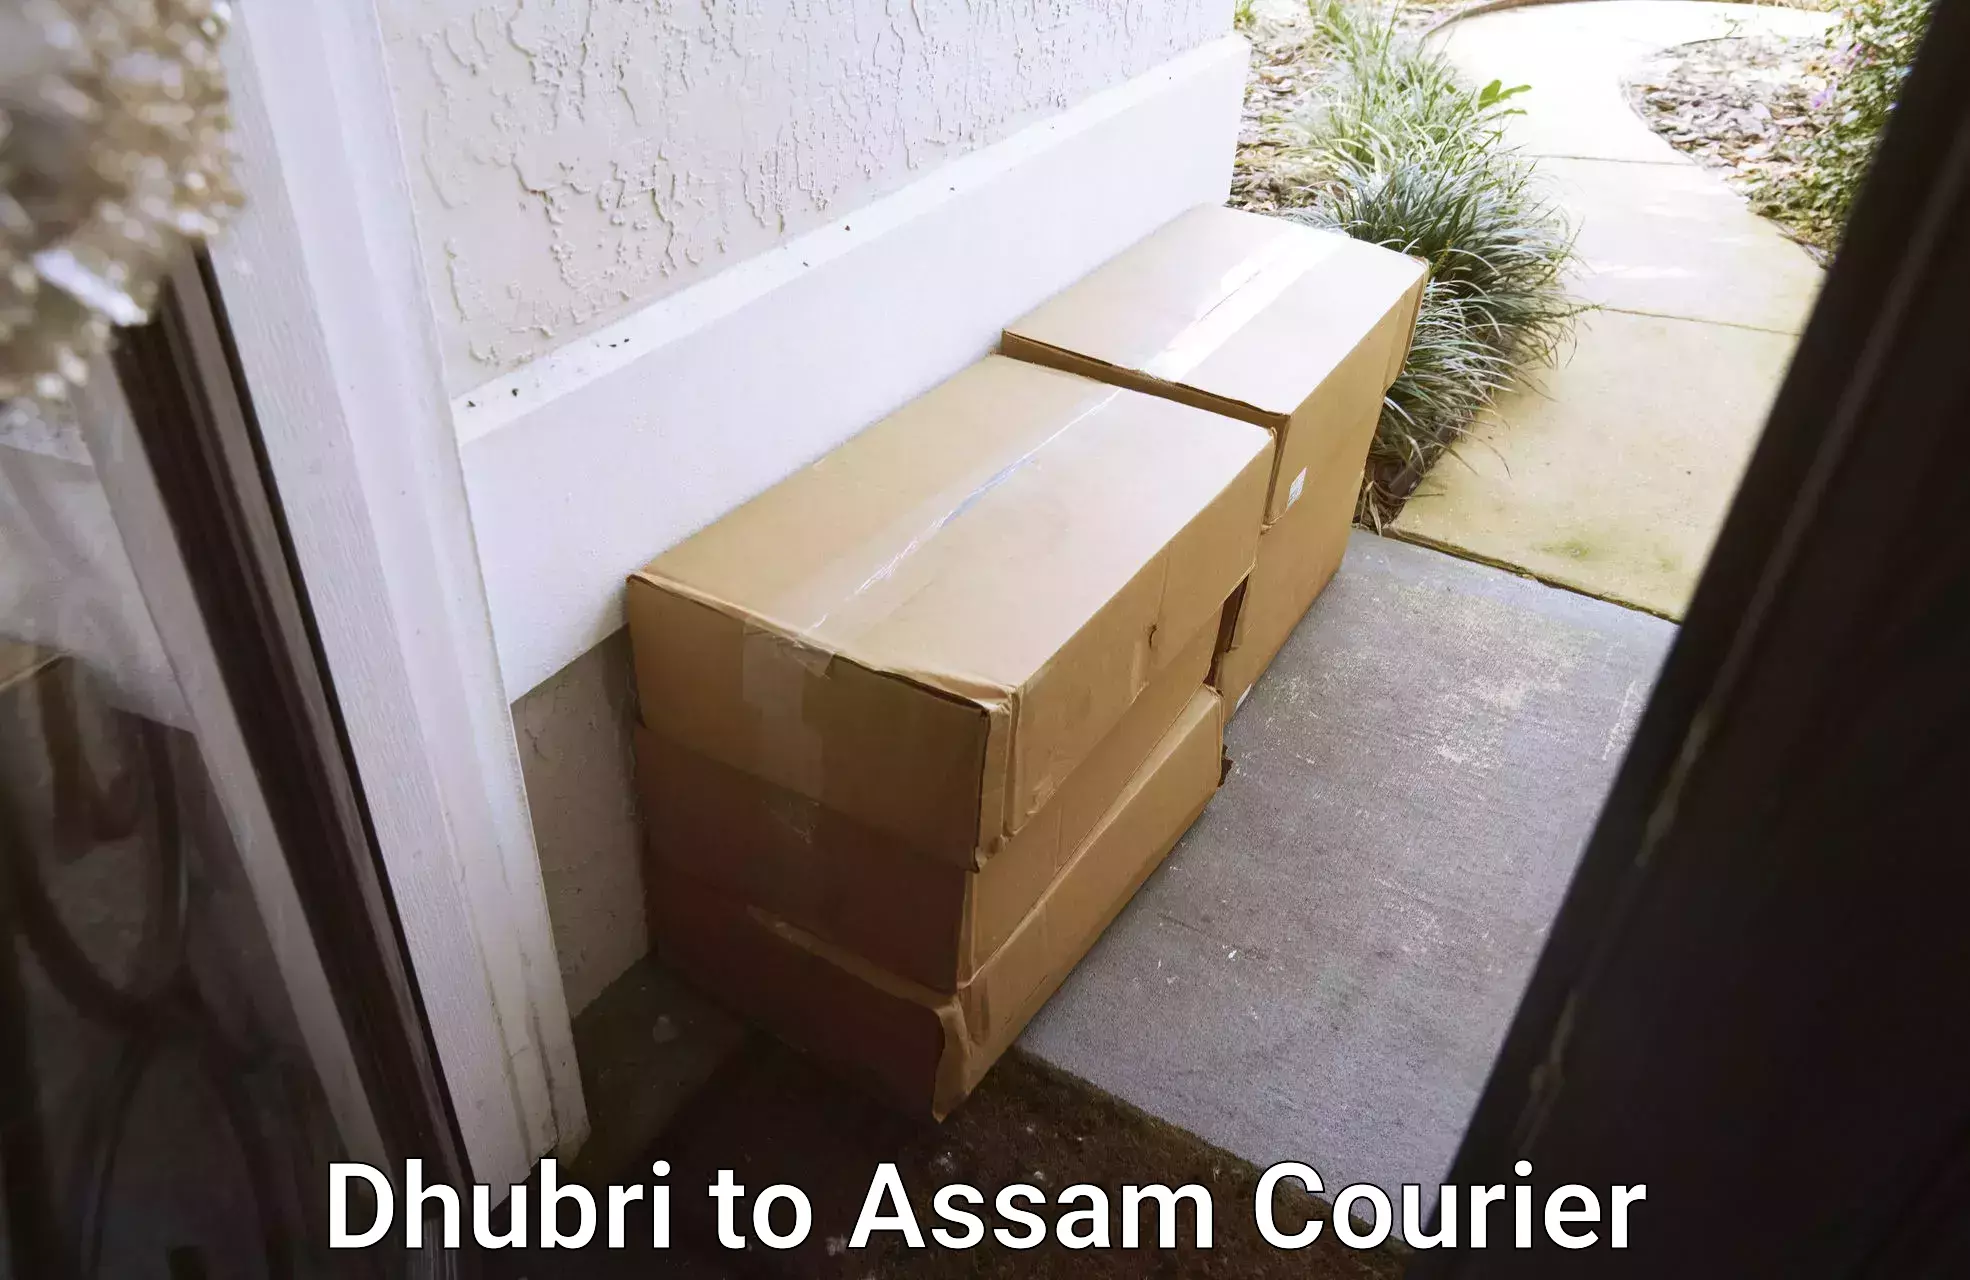 Express courier capabilities in Dhubri to Jorhat